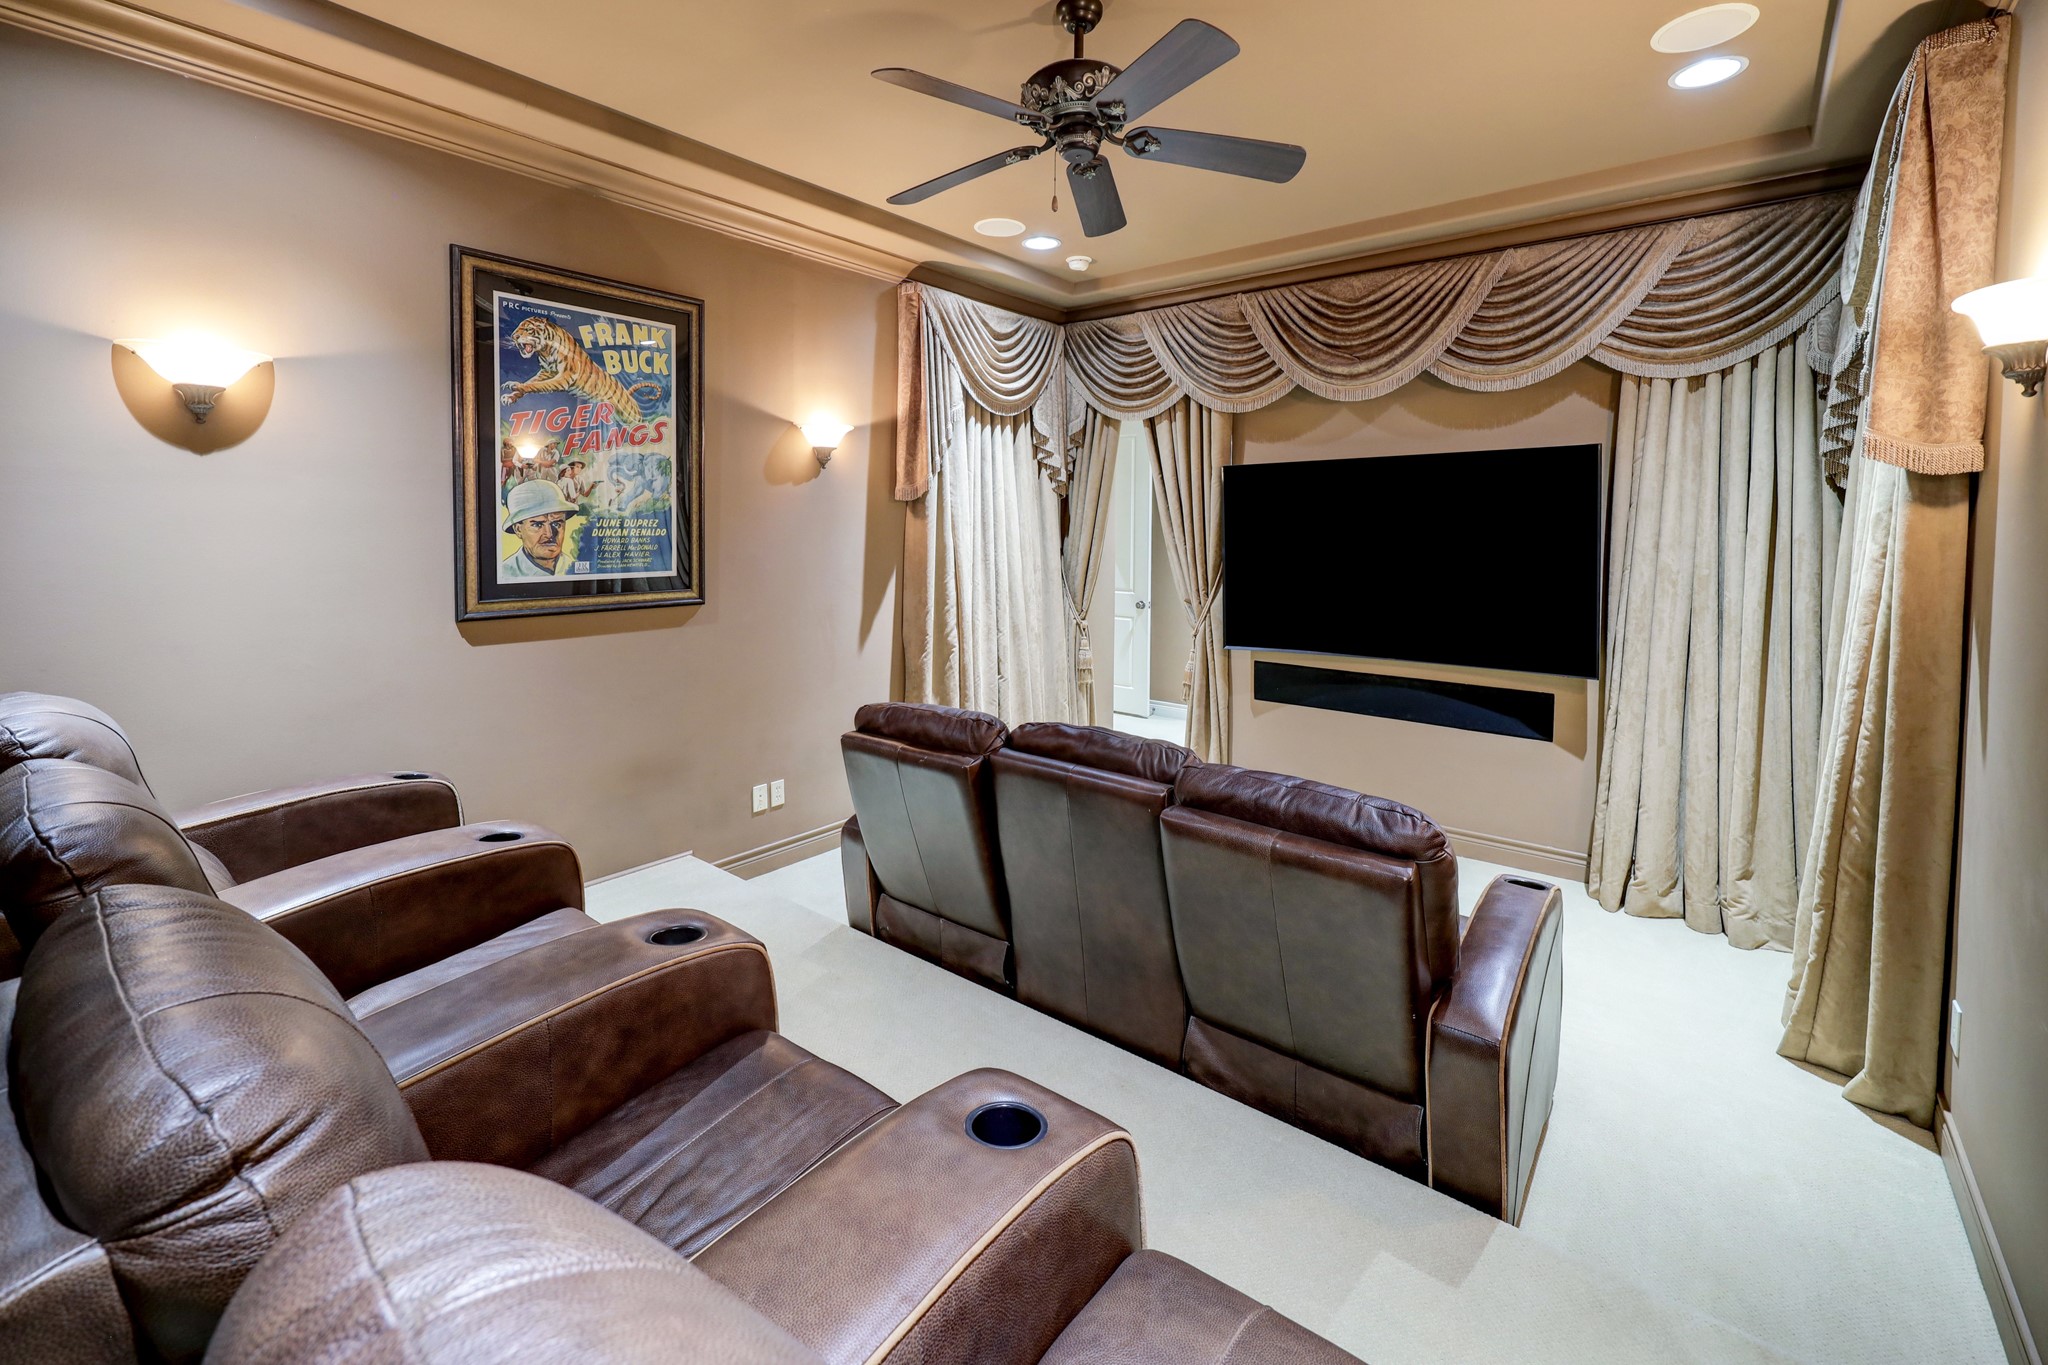 Another view of the Home Theatre.